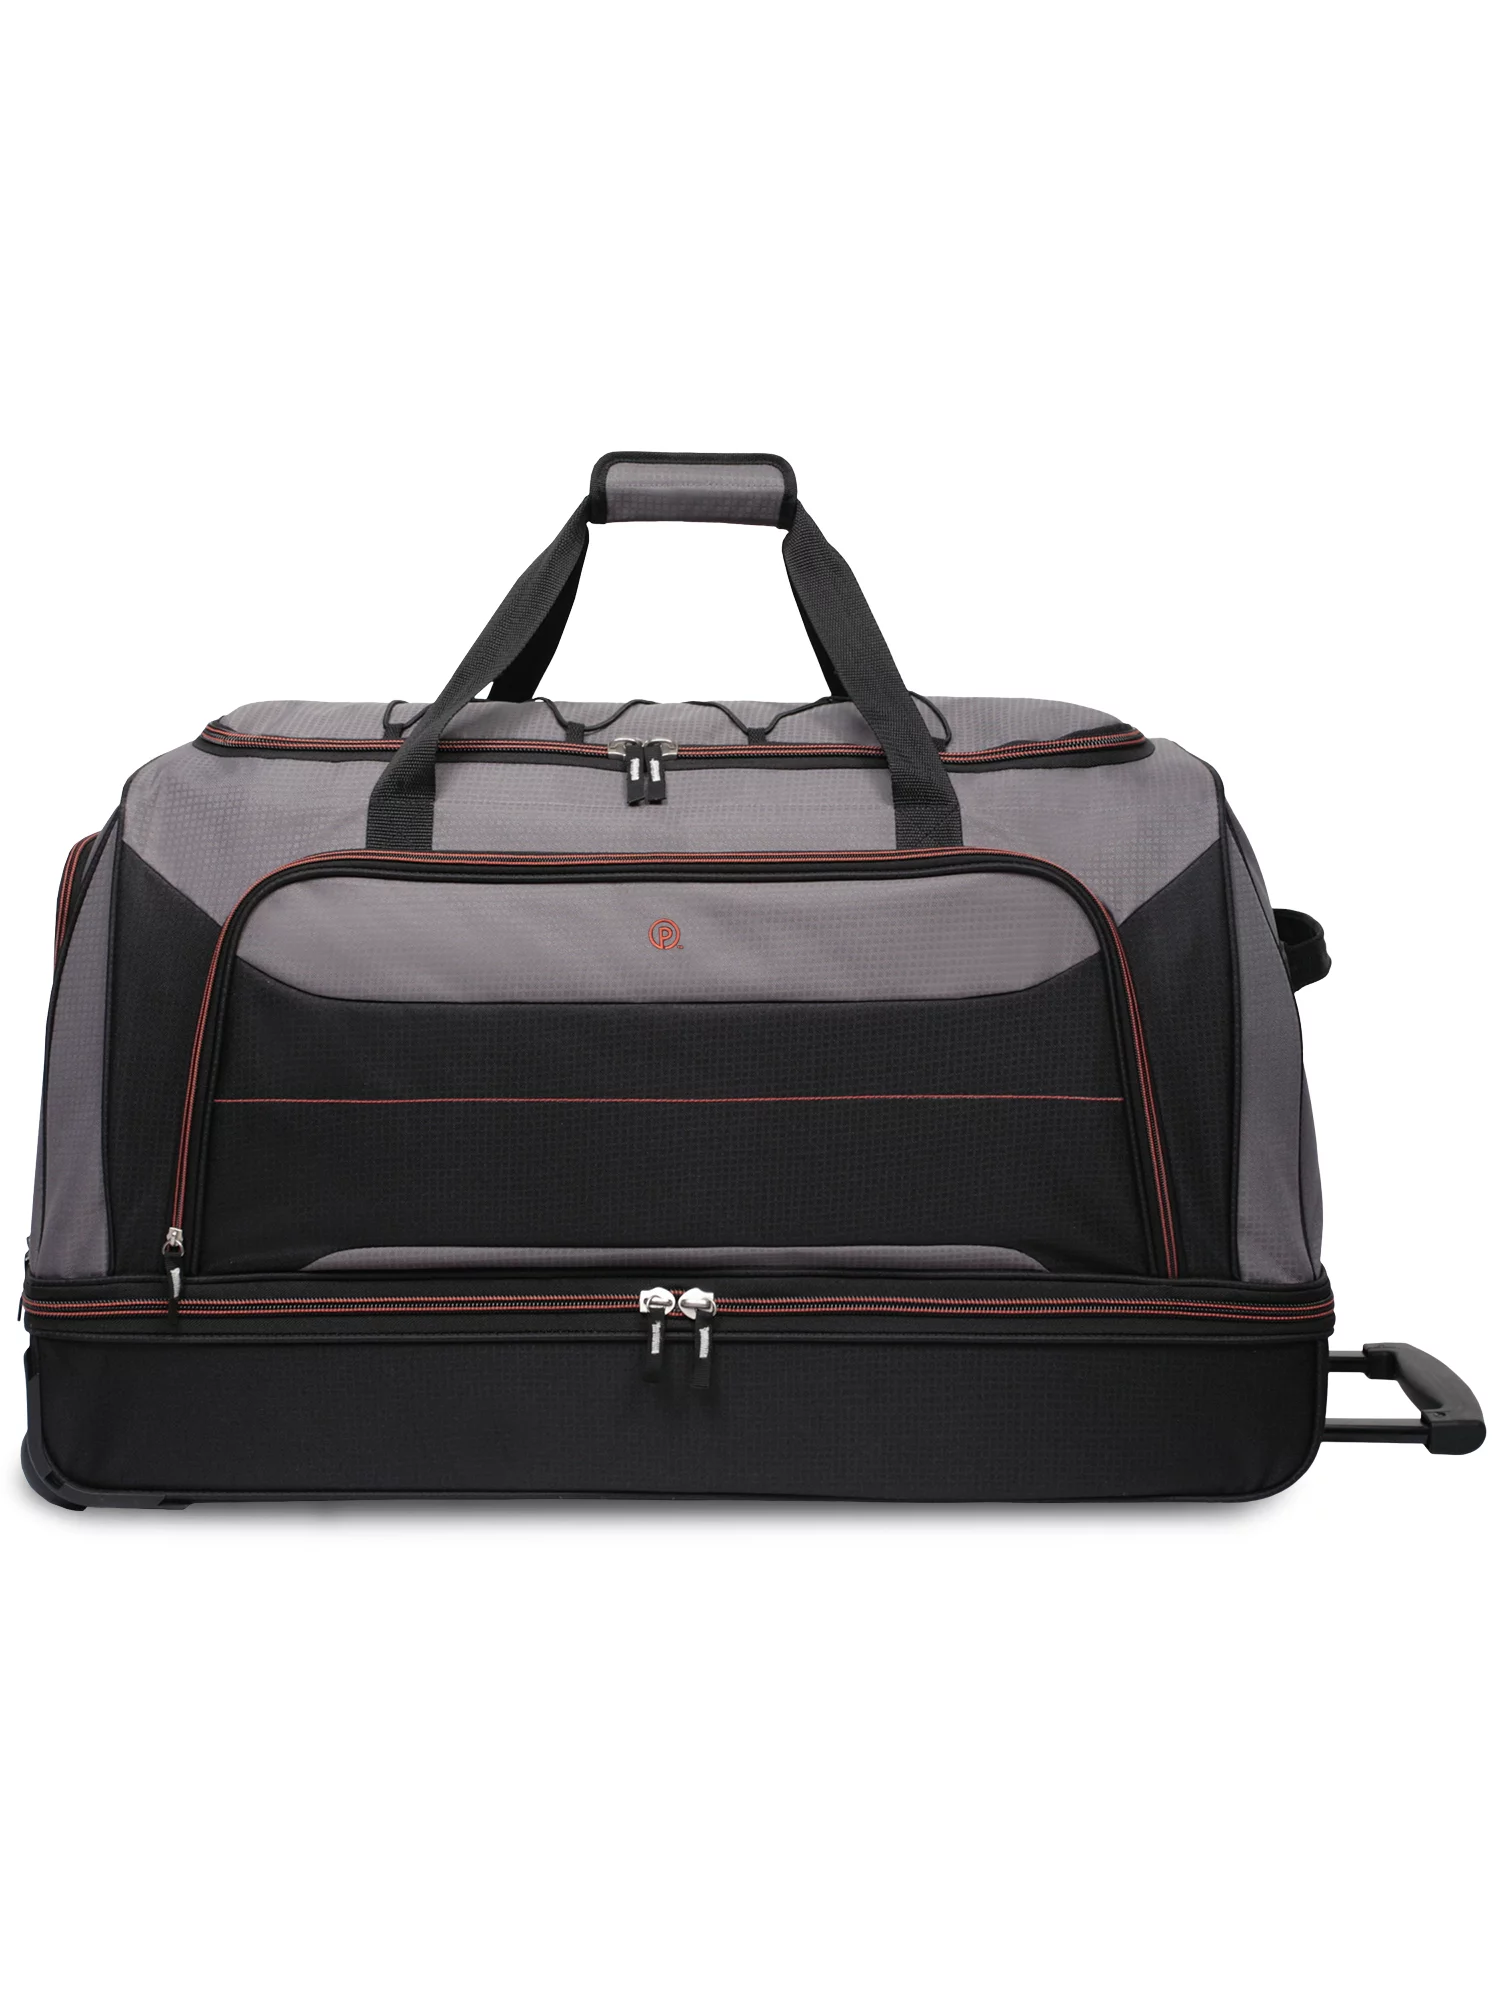 Protege 30 In Rolling Drop-Bottom Duffel Bag for Travel, Black and Grey